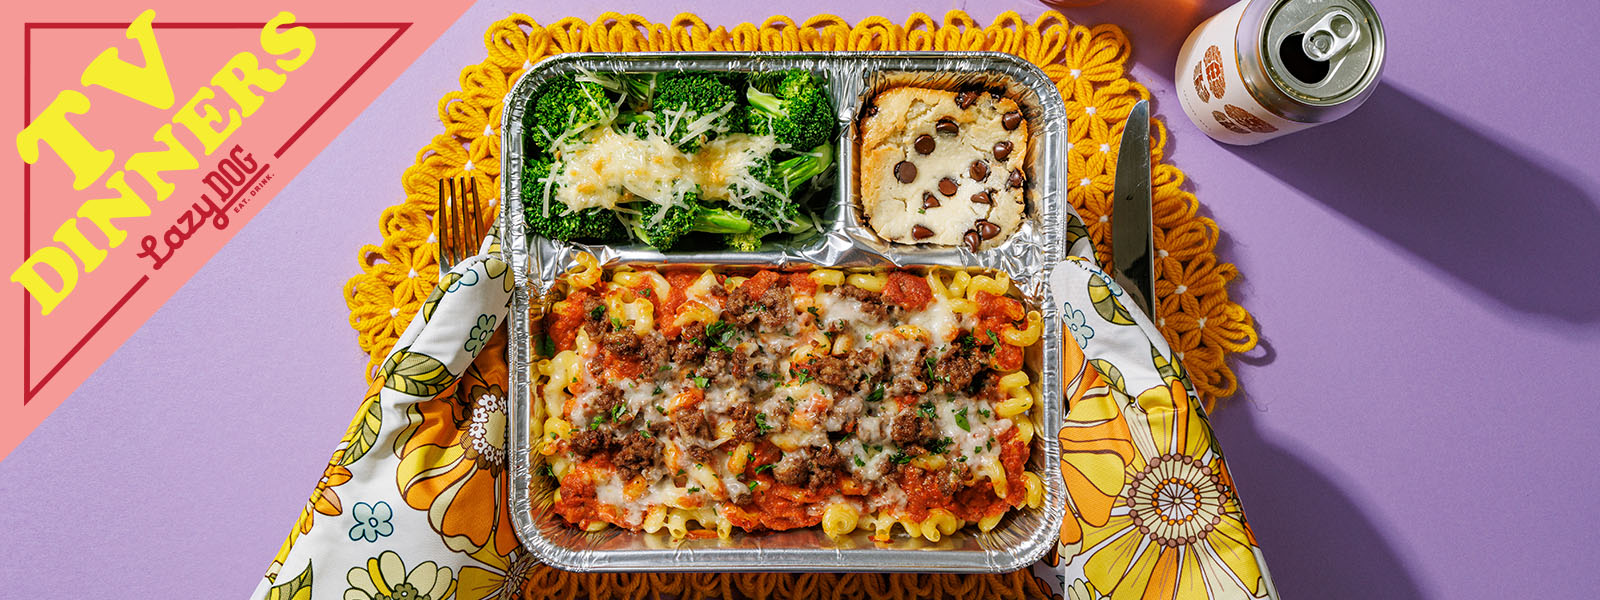 10 Fun Ideas For When Your TV Dinner Is Cooking